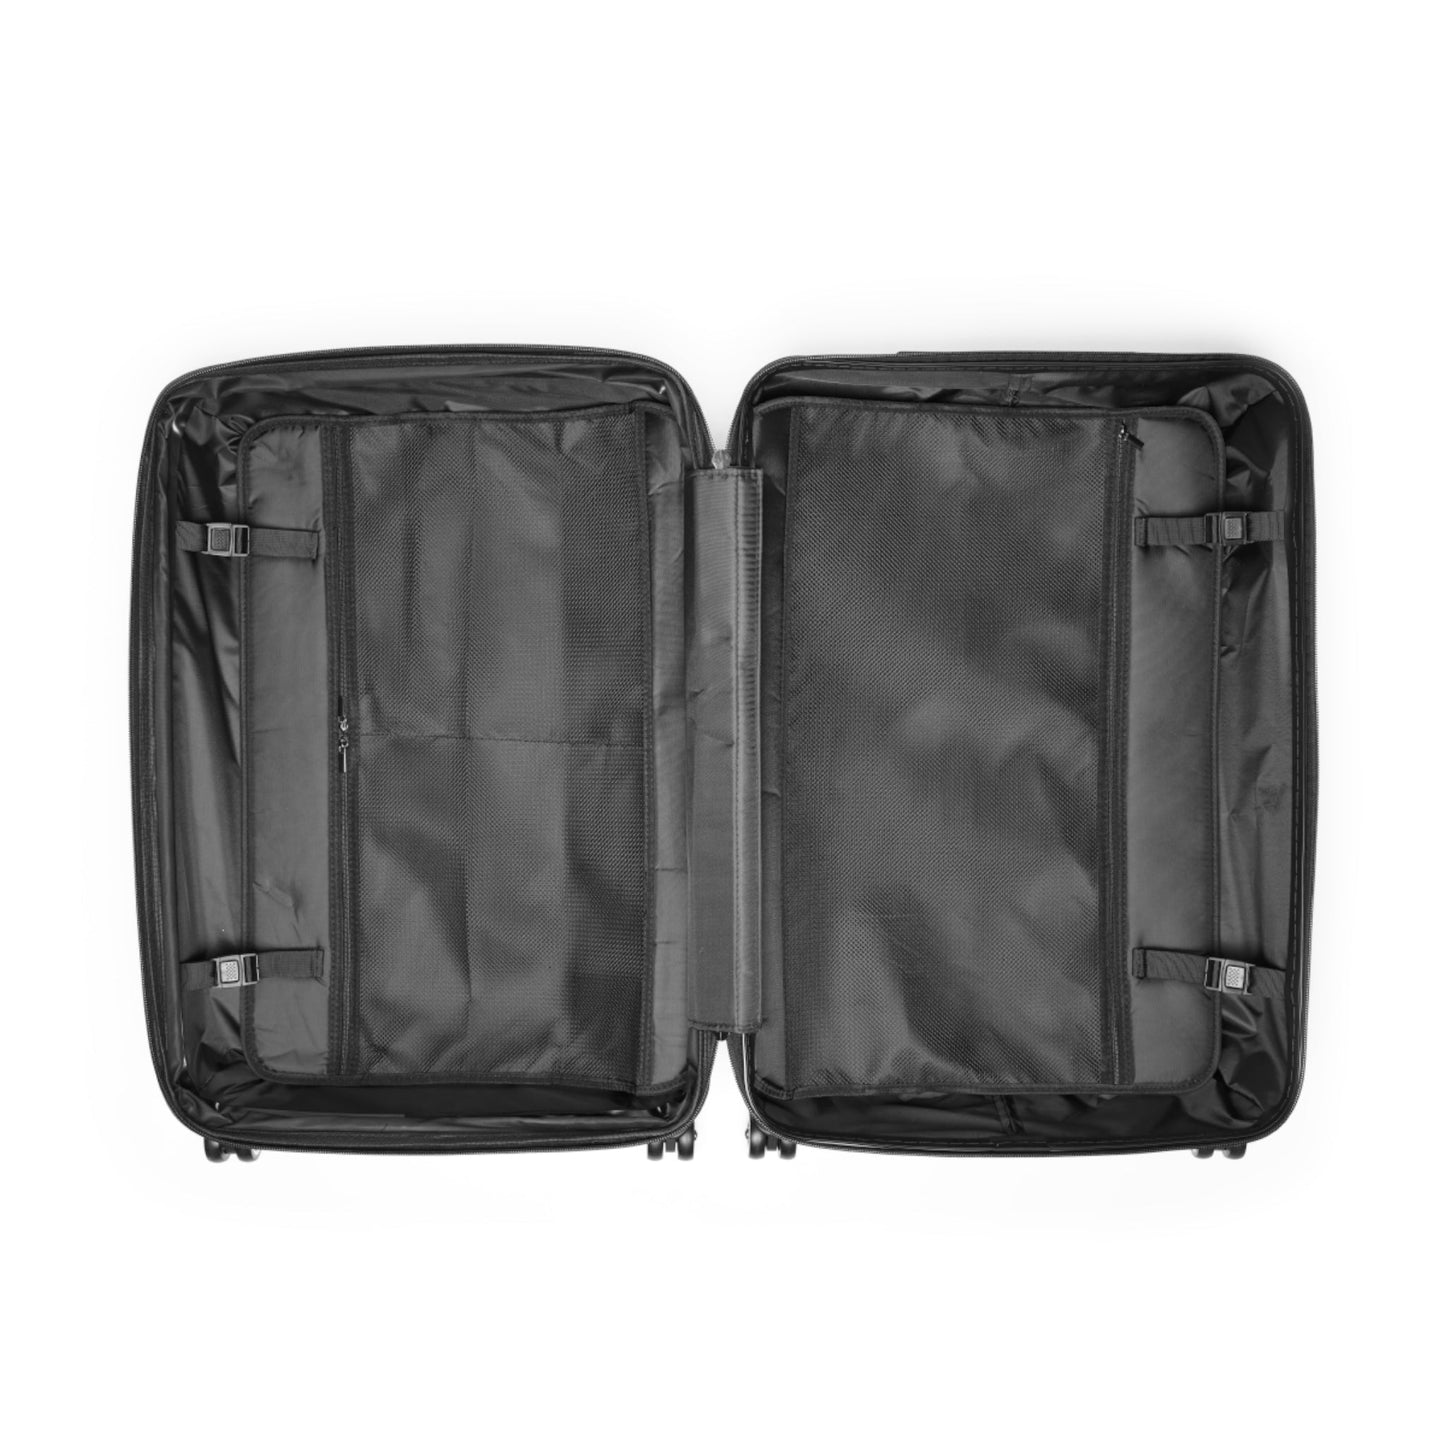 CATHERINE High-Quality Suitcase | Business travel luggage